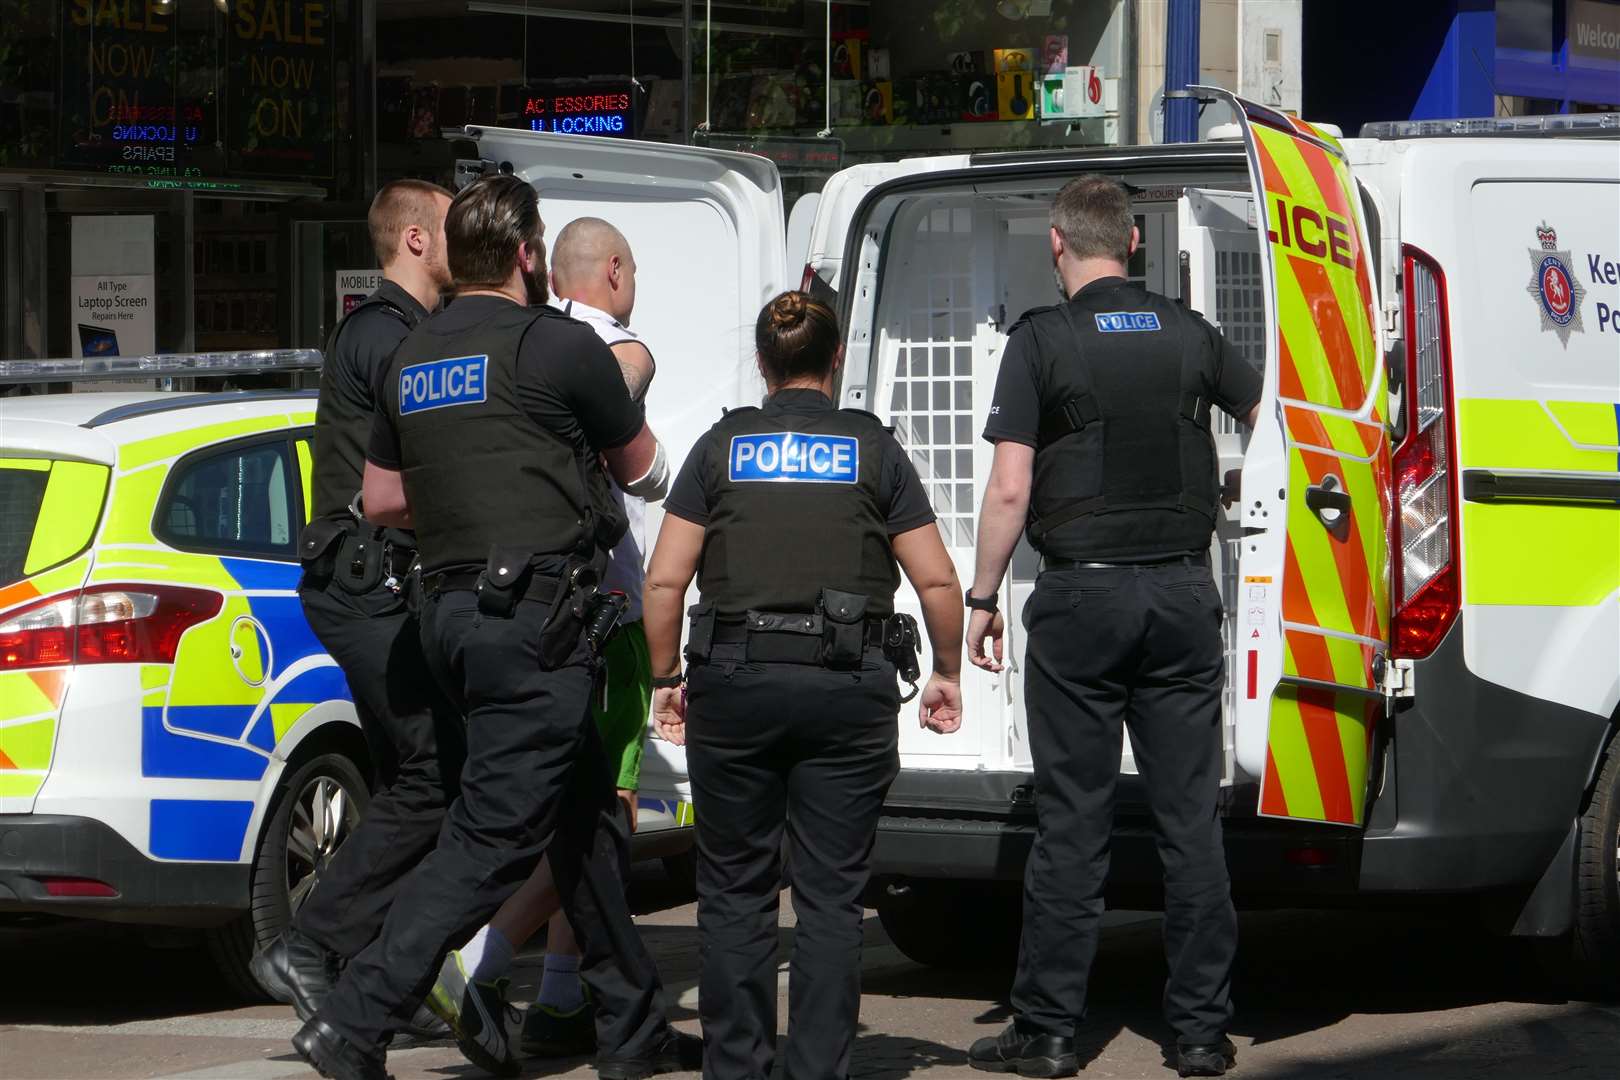 The man walked into a window and was later arrested for being drunk and disorderly